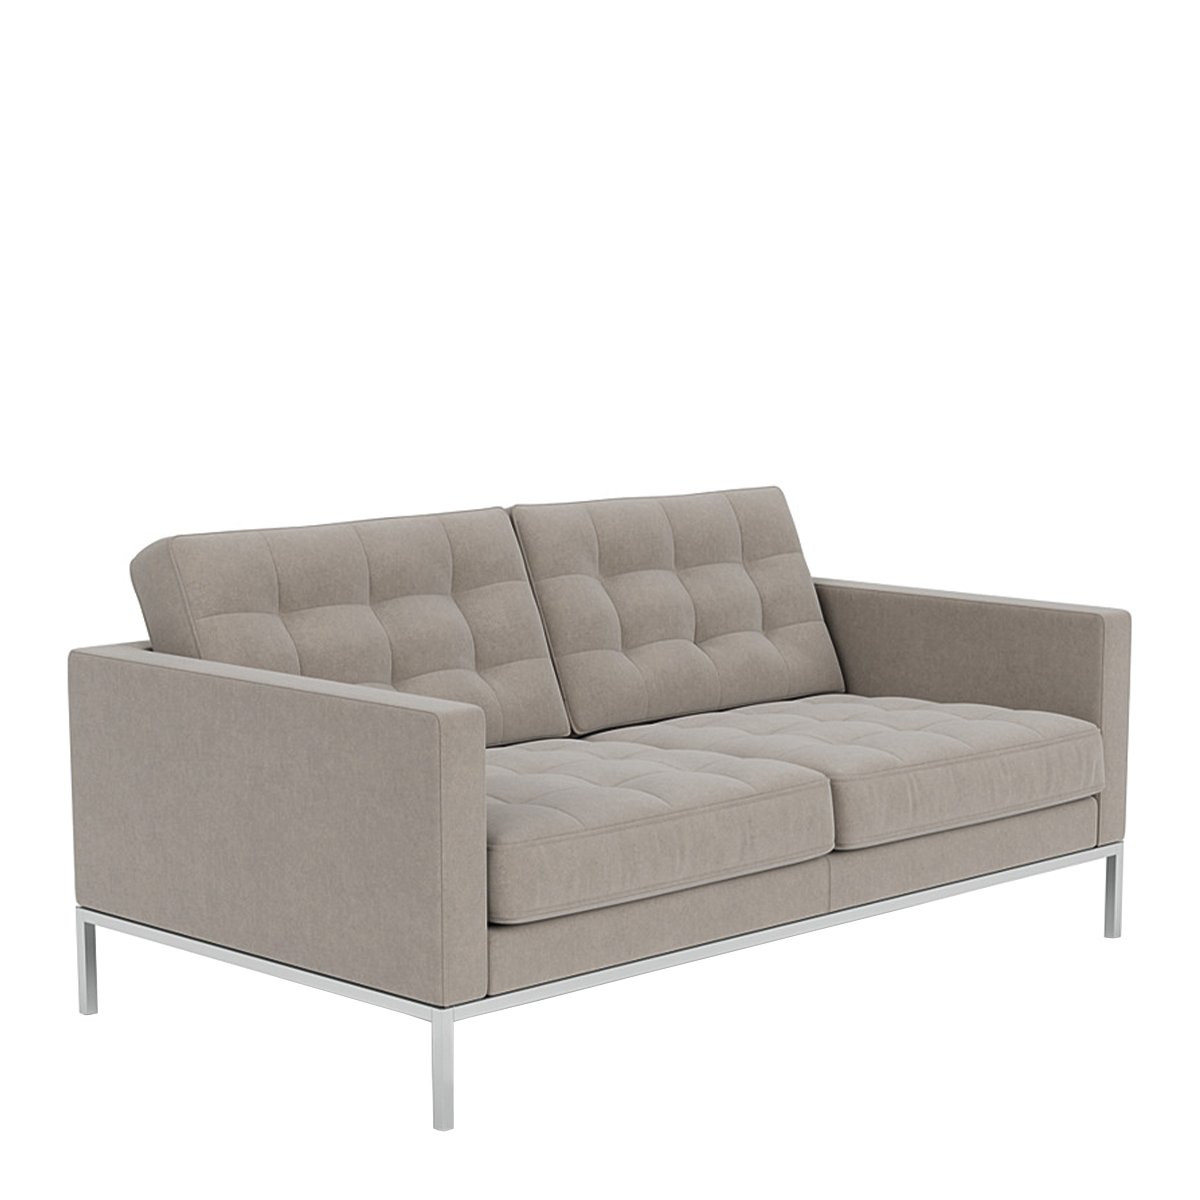 Knoll Florence Knoll Relaxed Sofa 2-zits